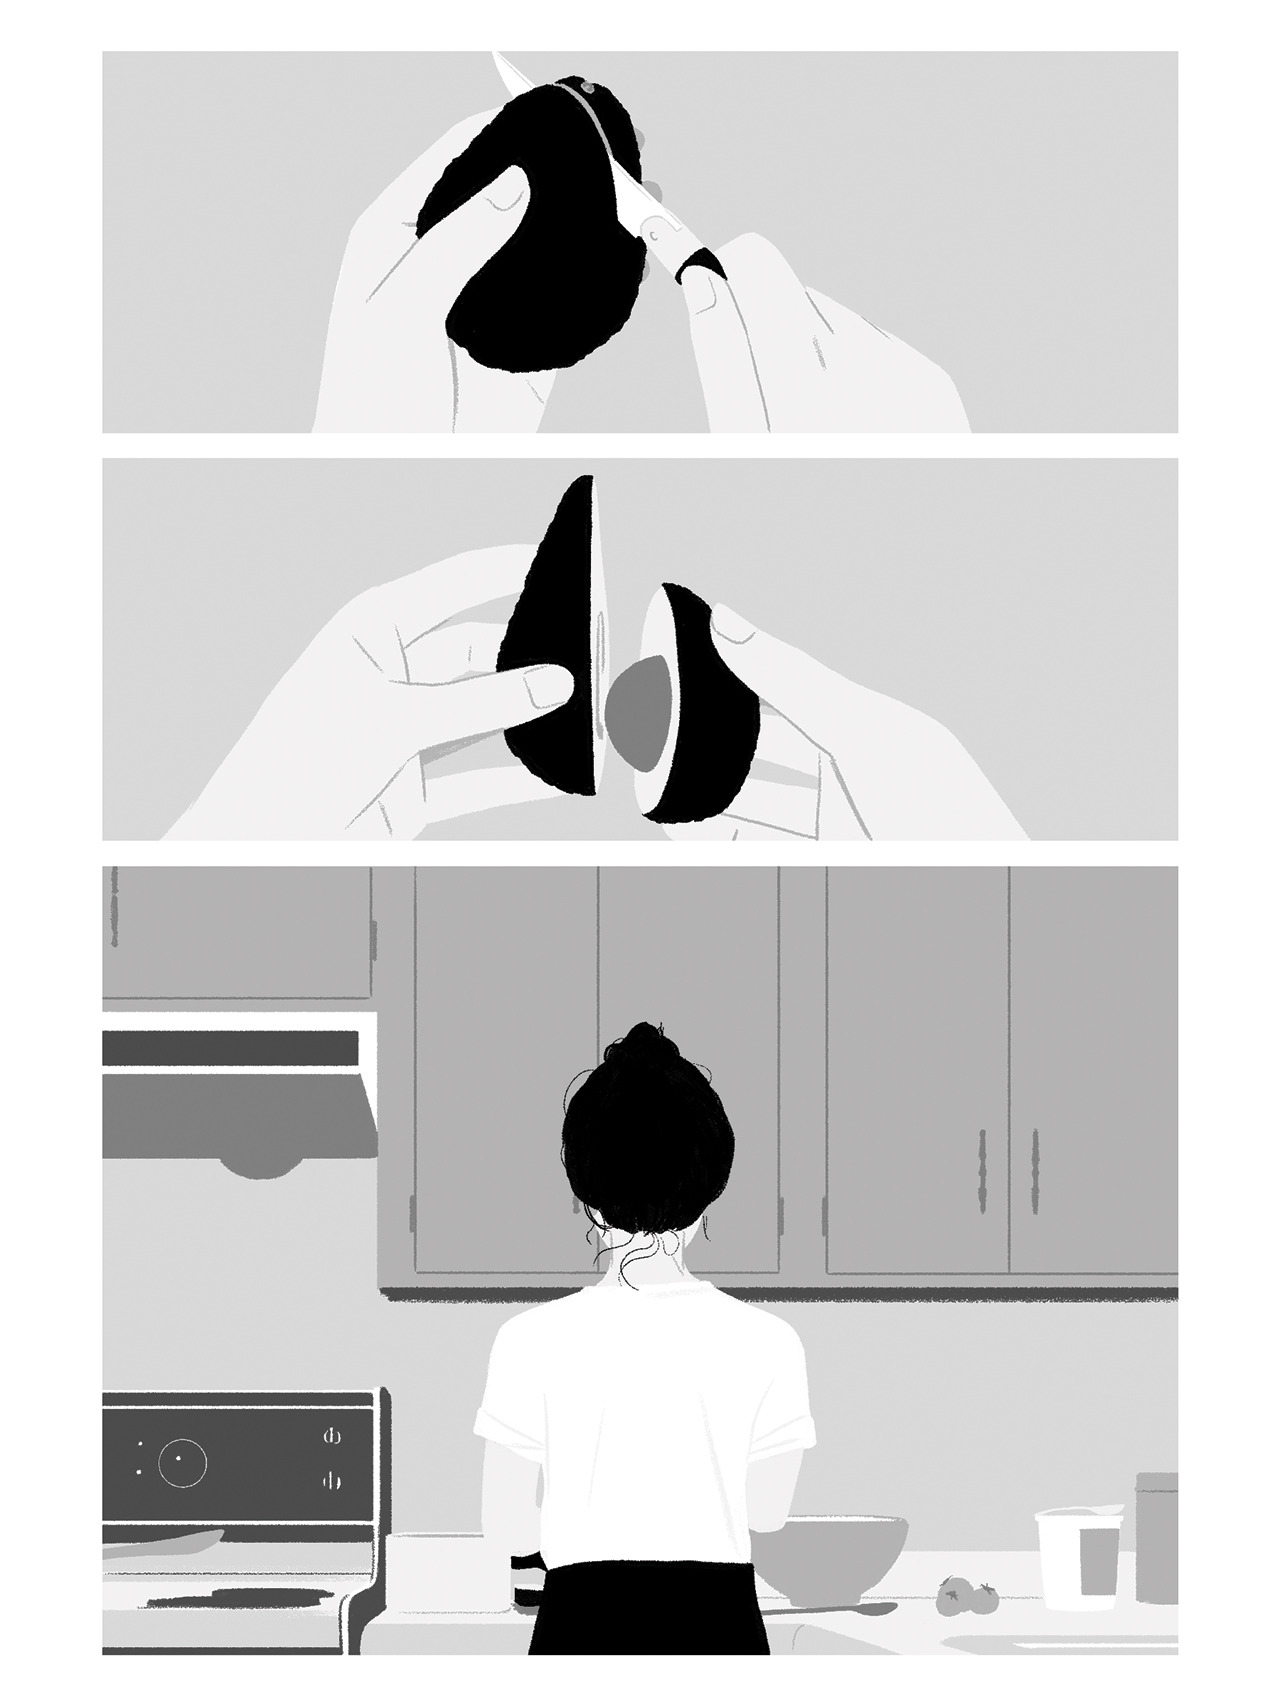 comic page from I'm Not Here. Three panels cut horizontally. First panel a pair of hands cuts into an avocado. Second panel the pair of hands separates the avocado. Third panel zooms out to reveal a person in a white shirt, and black pants standing at a kitchen counter.